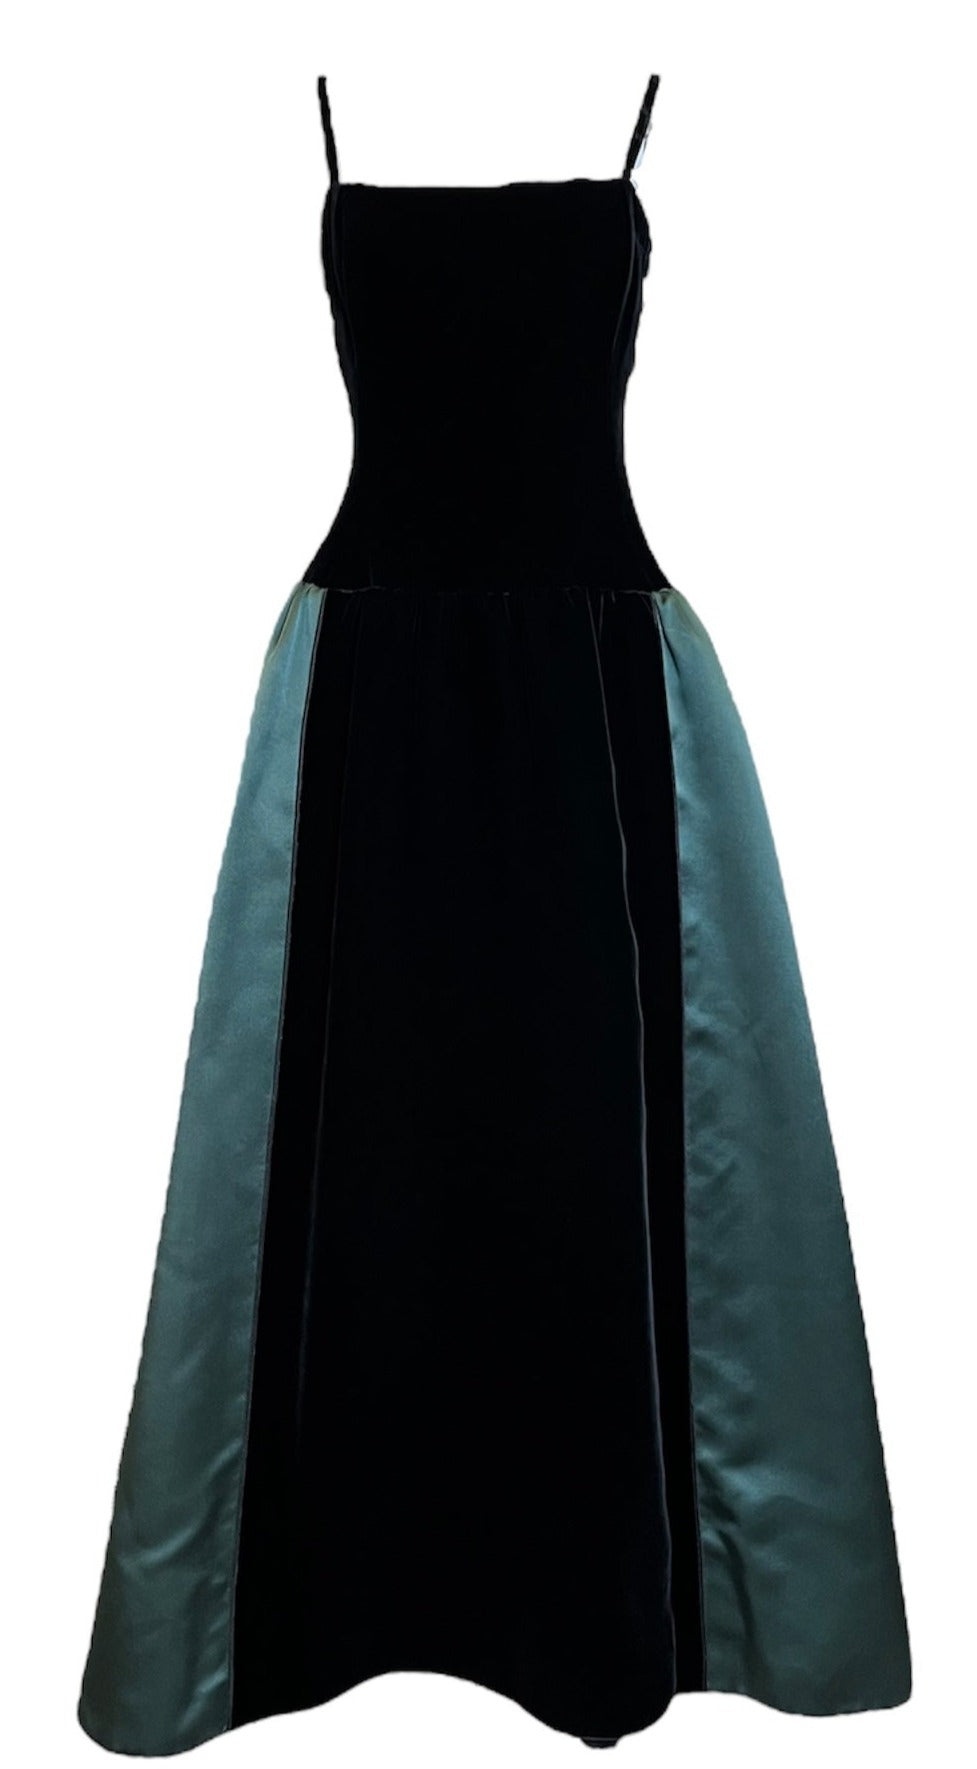 Yves Saint Laurent Couture 80s Black Velvet and Green Satin Gown FRONT 1 of 4